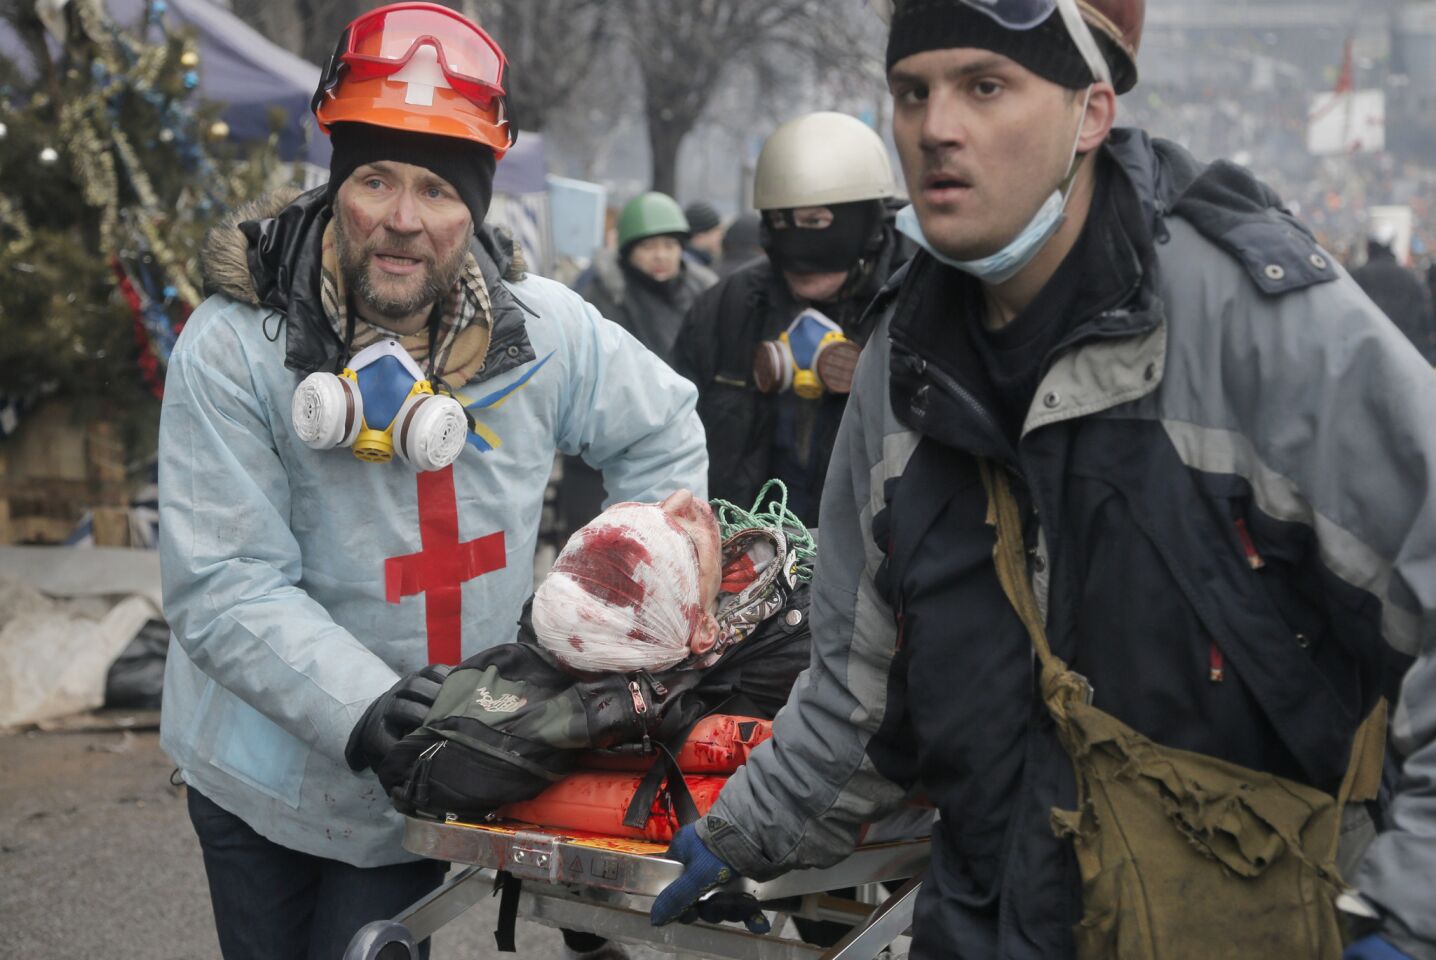 A wounded Ukrainian protester is evacuated during clashes with police in Kiev's Independence Square.